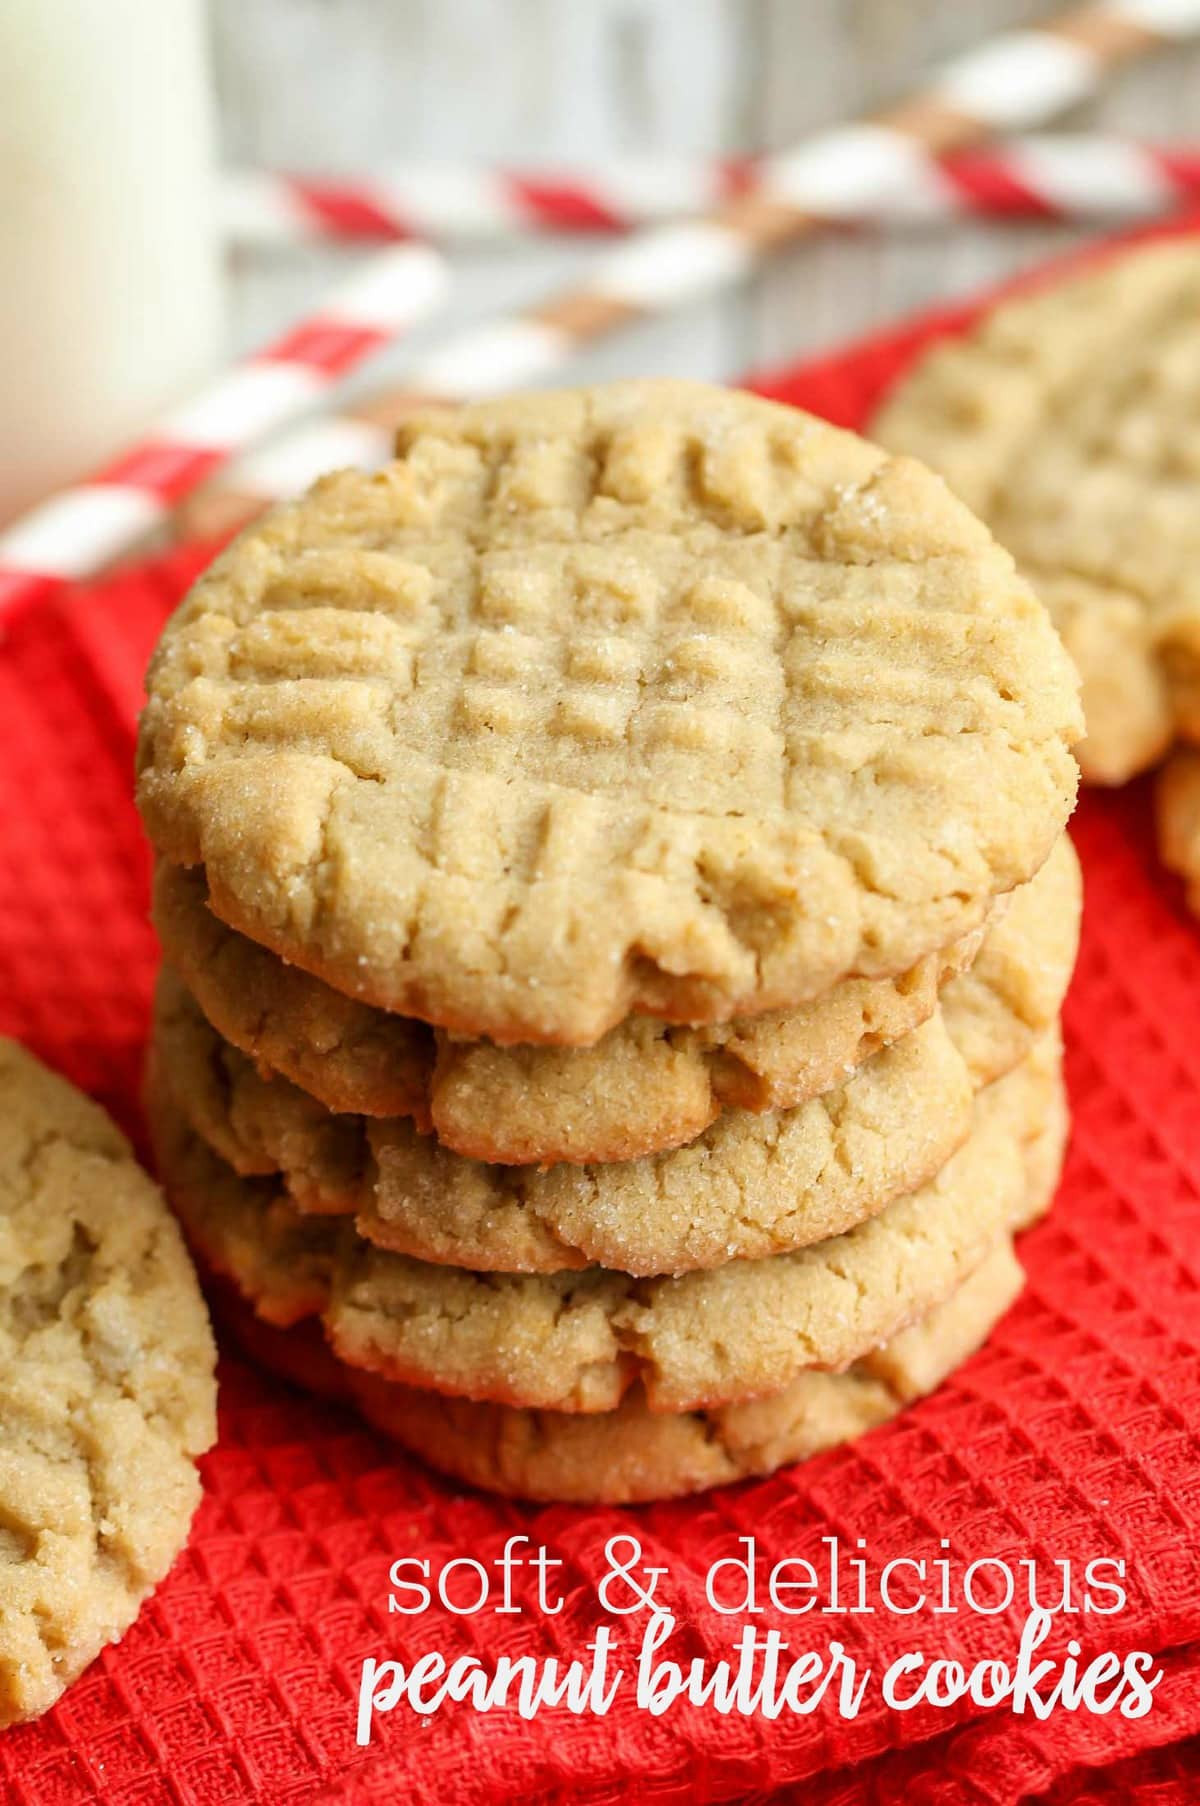 Easy Soft Peanut Butter Cookies
 EASY & SOFT Peanut Butter Cookies